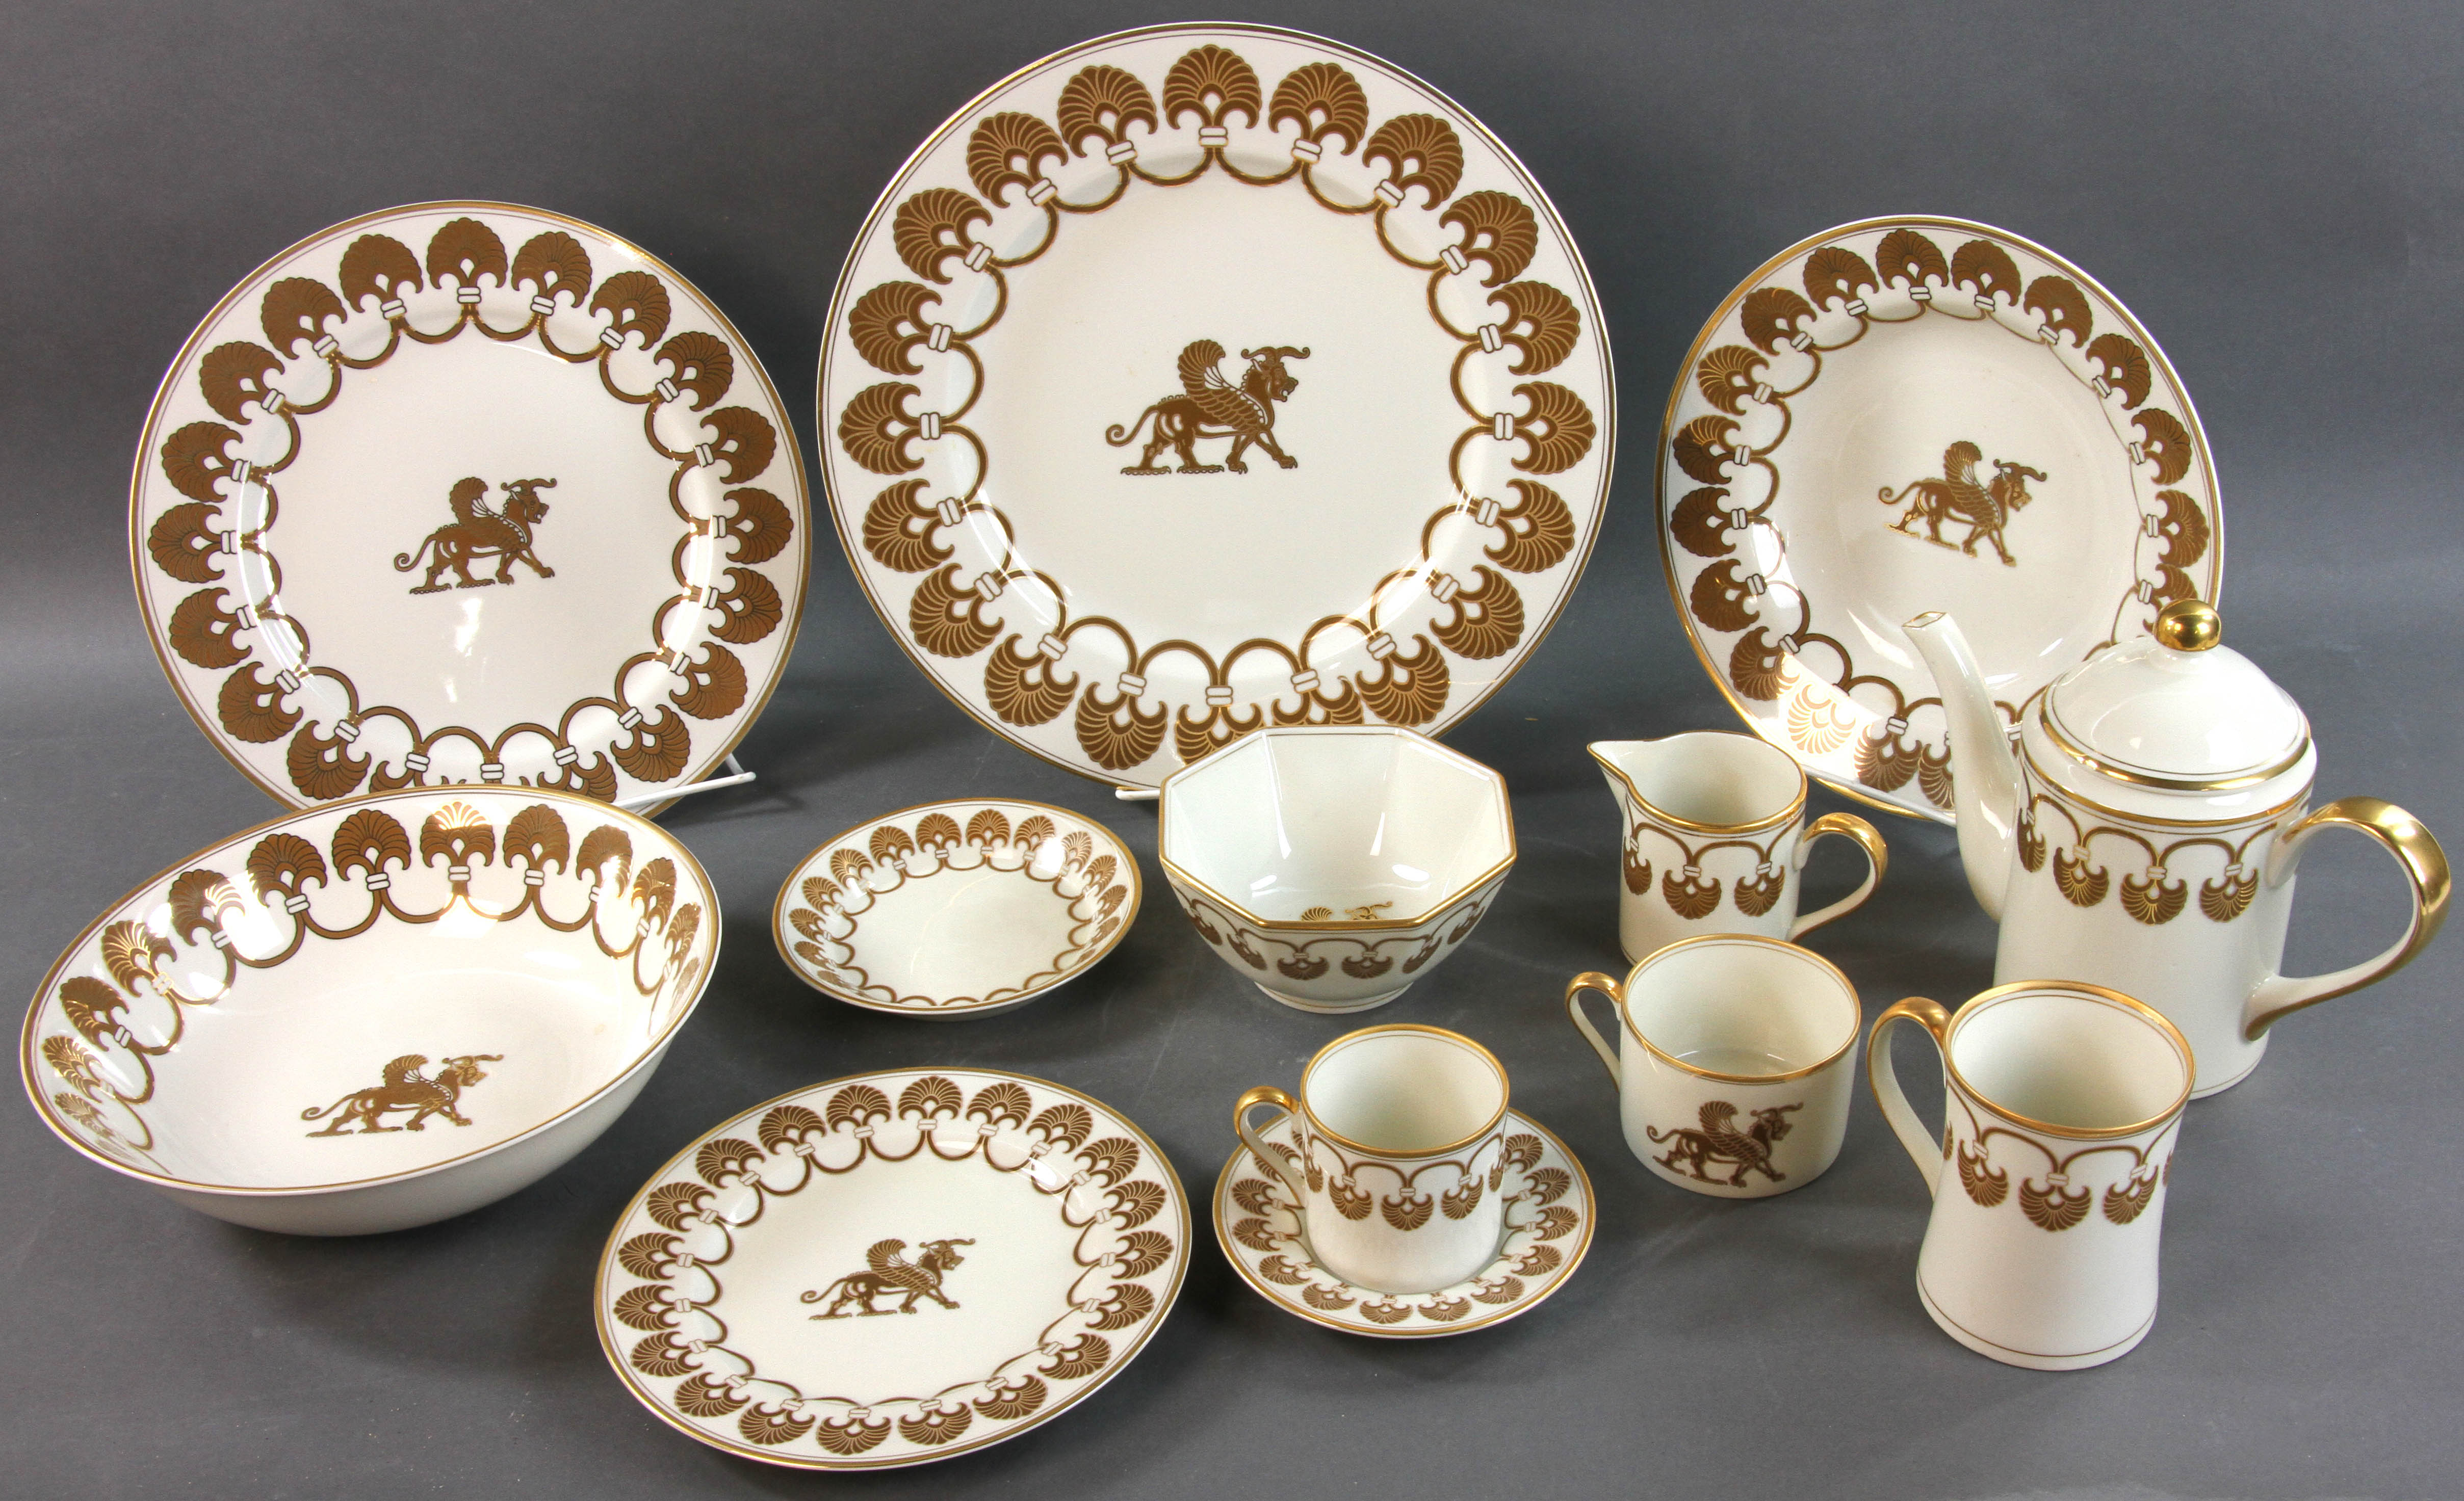 Over 200 partial china sets, dinner services from fine names such as Limoges, Royal Crown Derby etc..